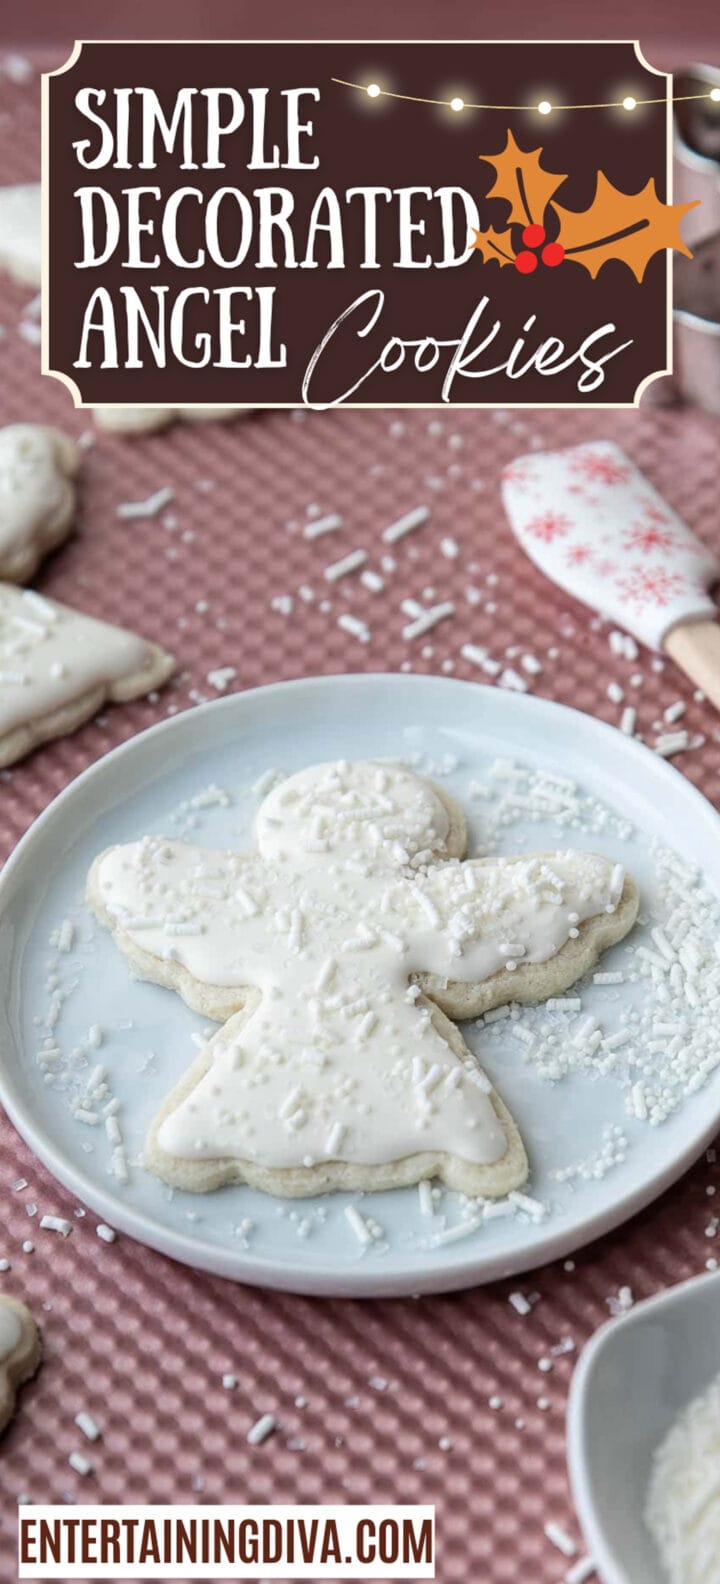 Simple Decorated Christmas Angel Cut Out Cookies